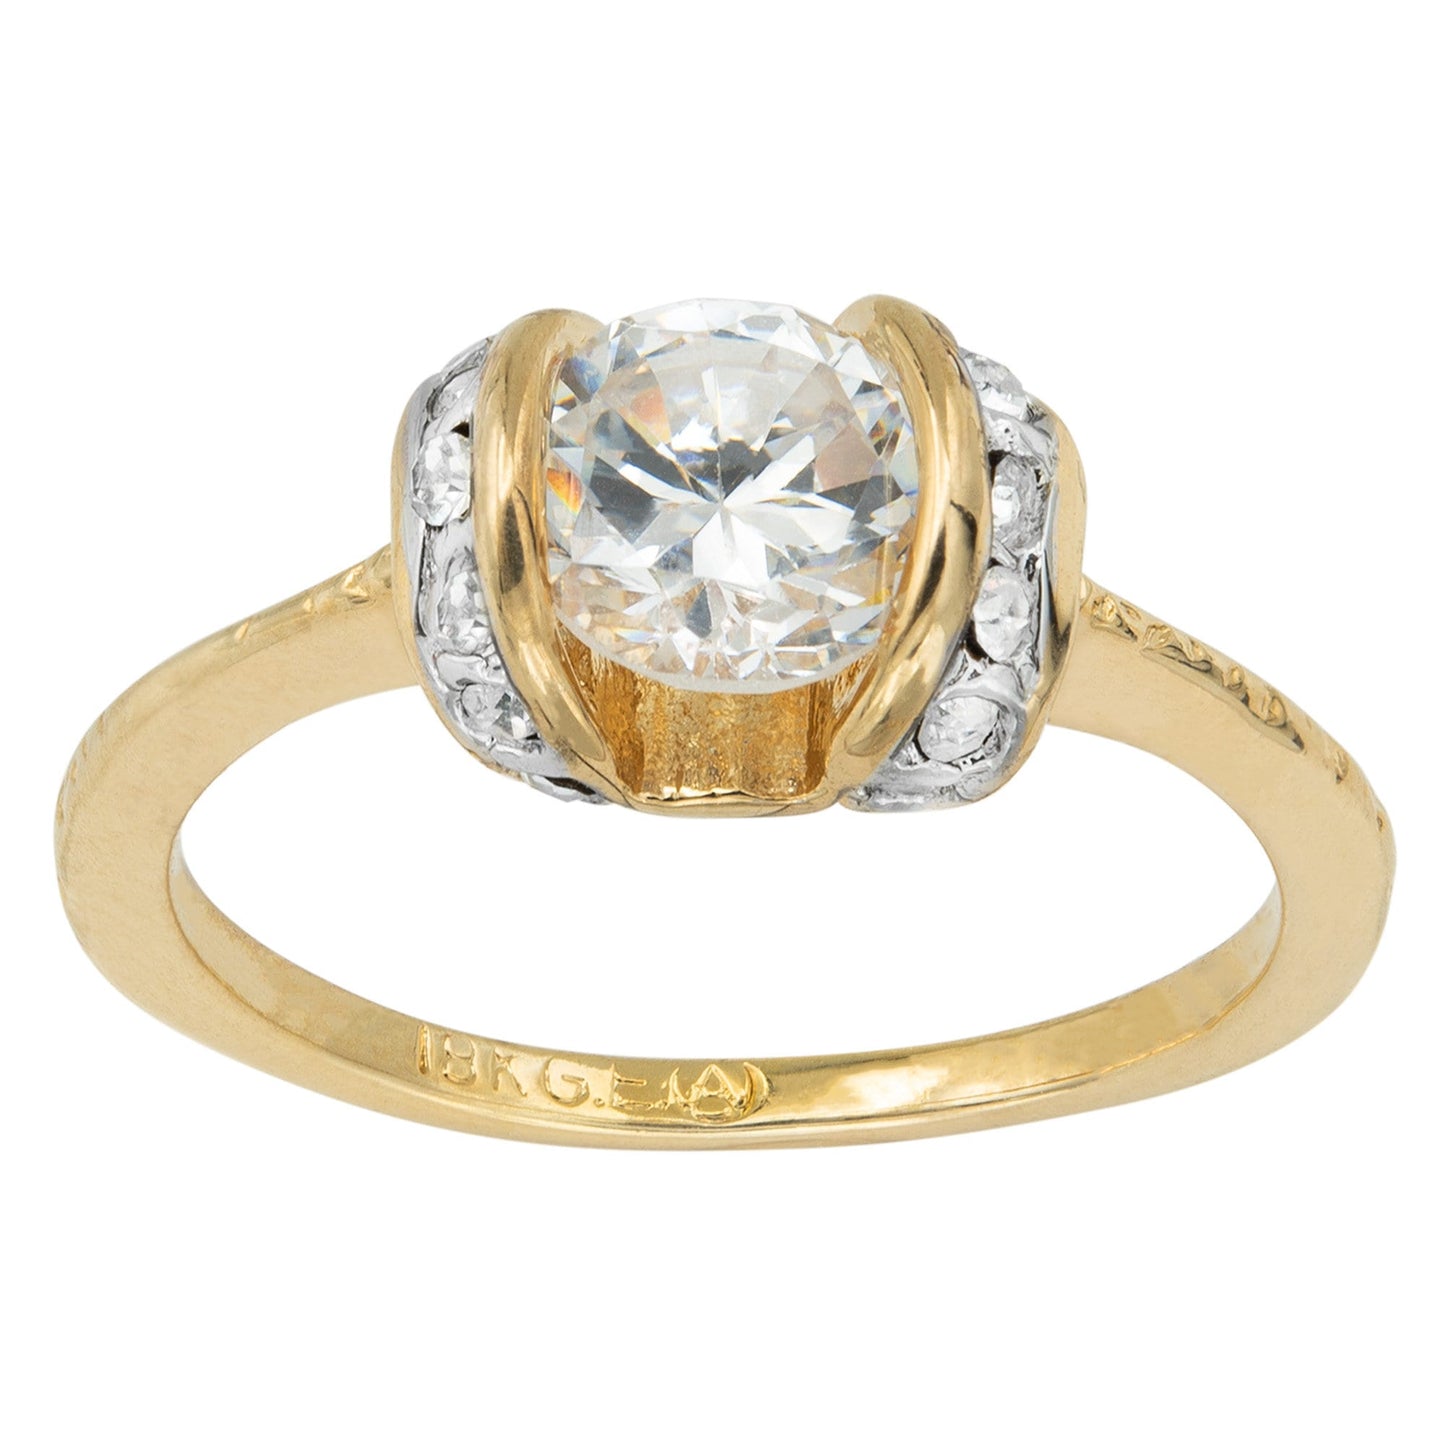 Vintage Ring Cubic Zirconia Solitaire Engagement Style Ring 18KT Gold #R3464 - Limited Stock - Never Worn